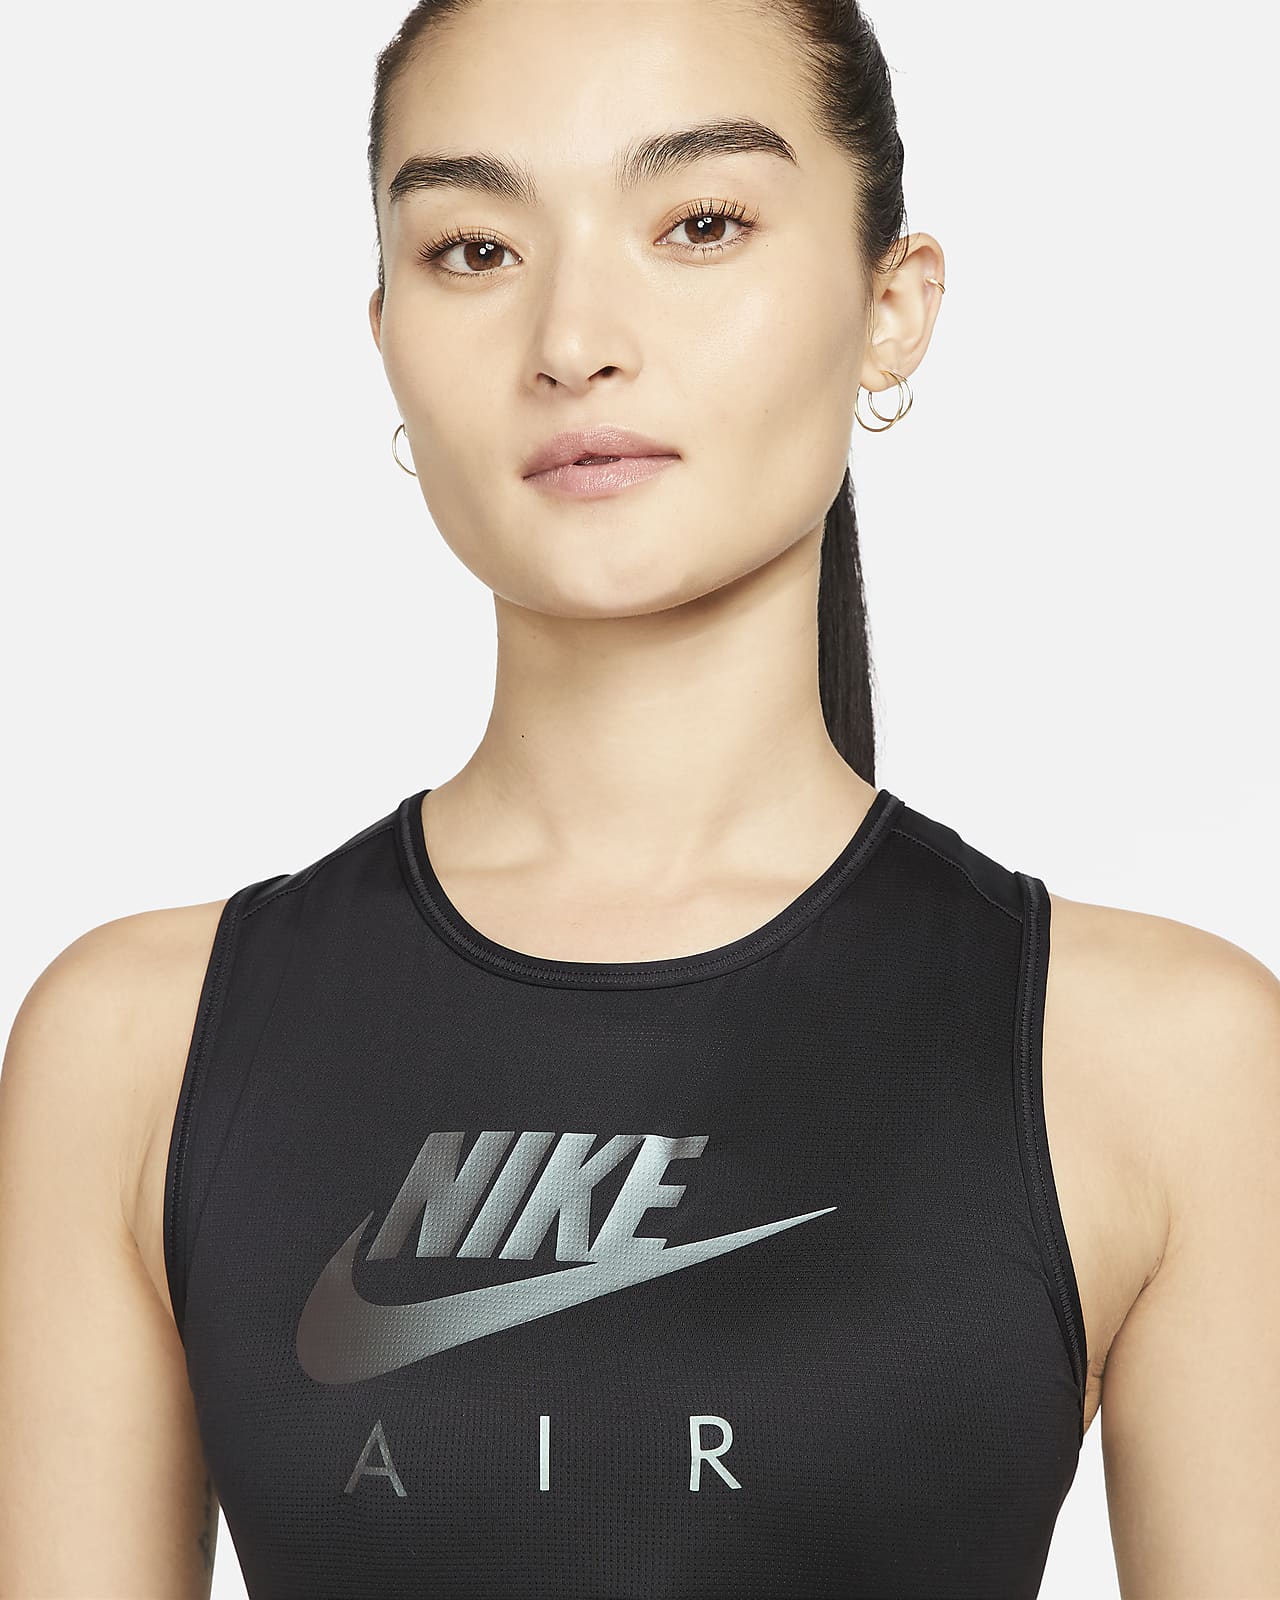 The Best Nike High-Neck Sports Bras. Nike AT